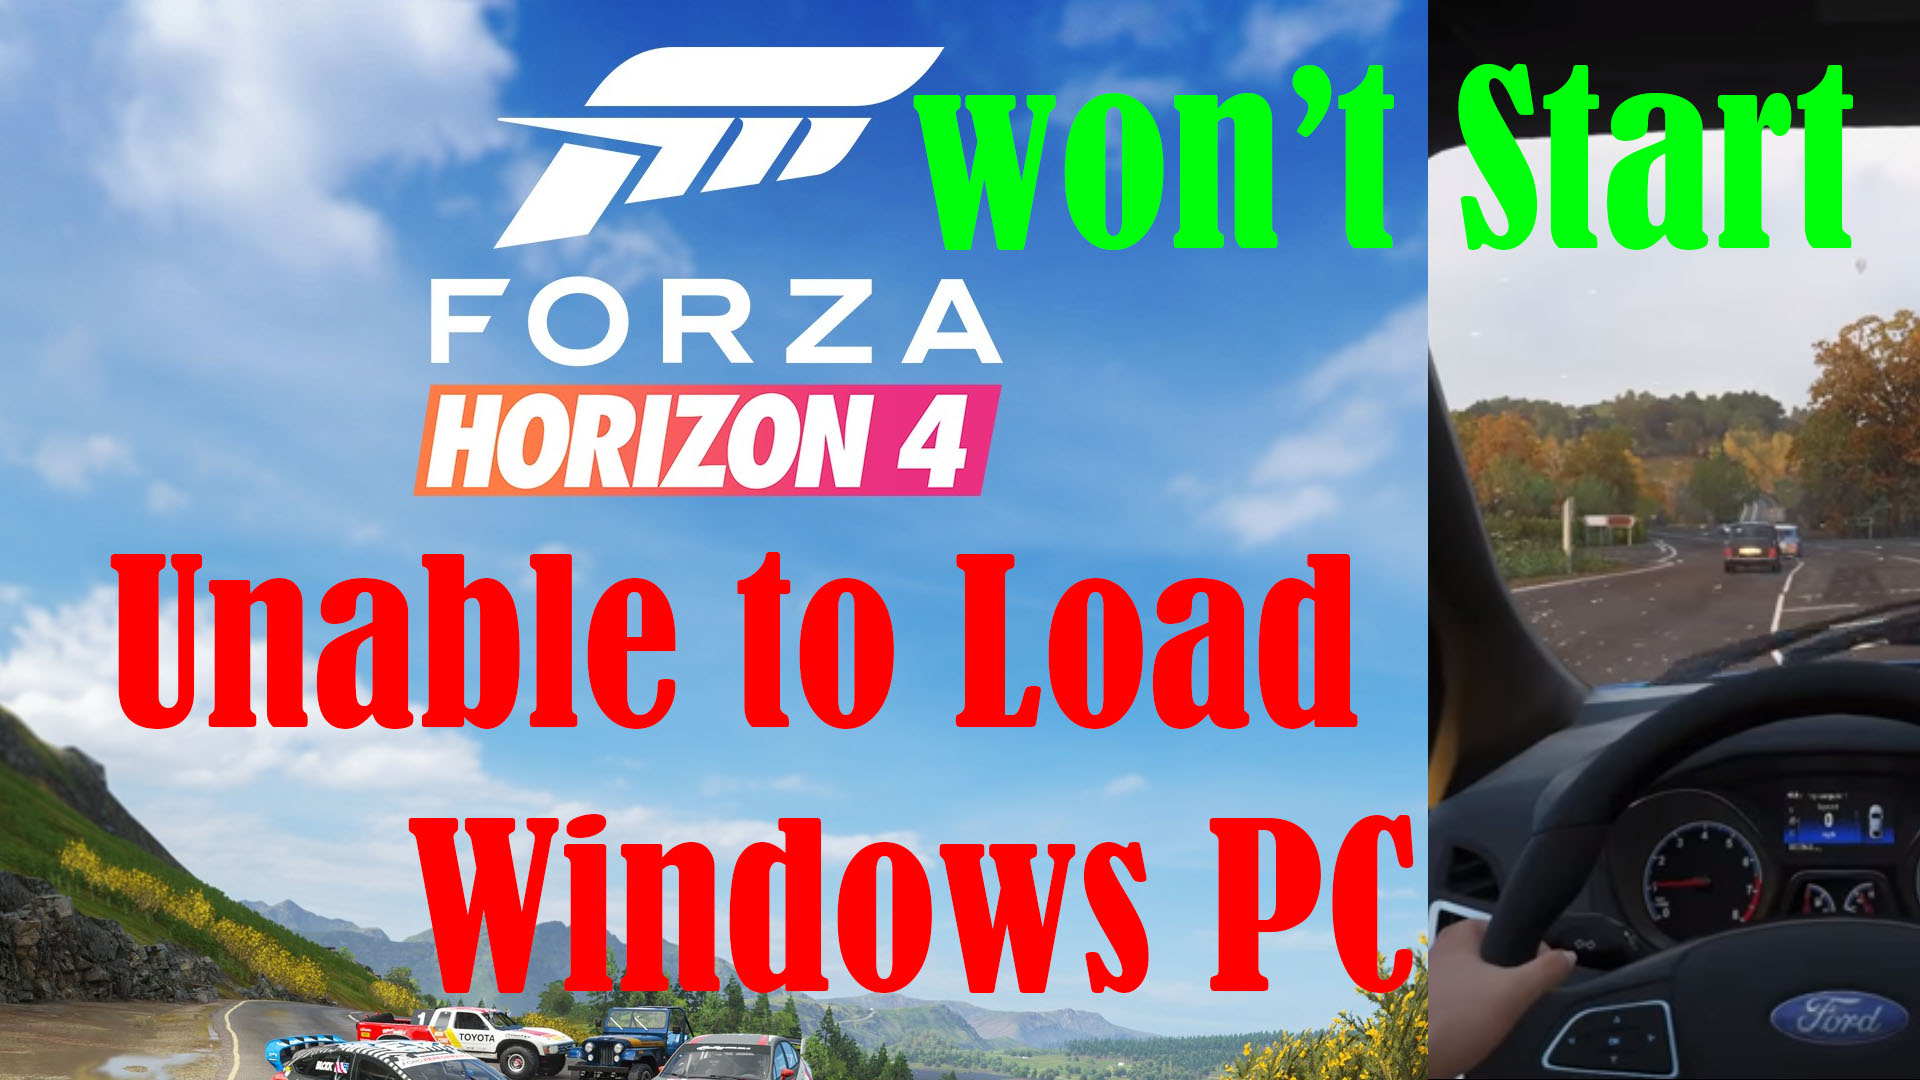 Launch Forza Horizon 4 and check if the startup problem is resolved.
Remember to re-enable the antivirus software or firewall after testing.